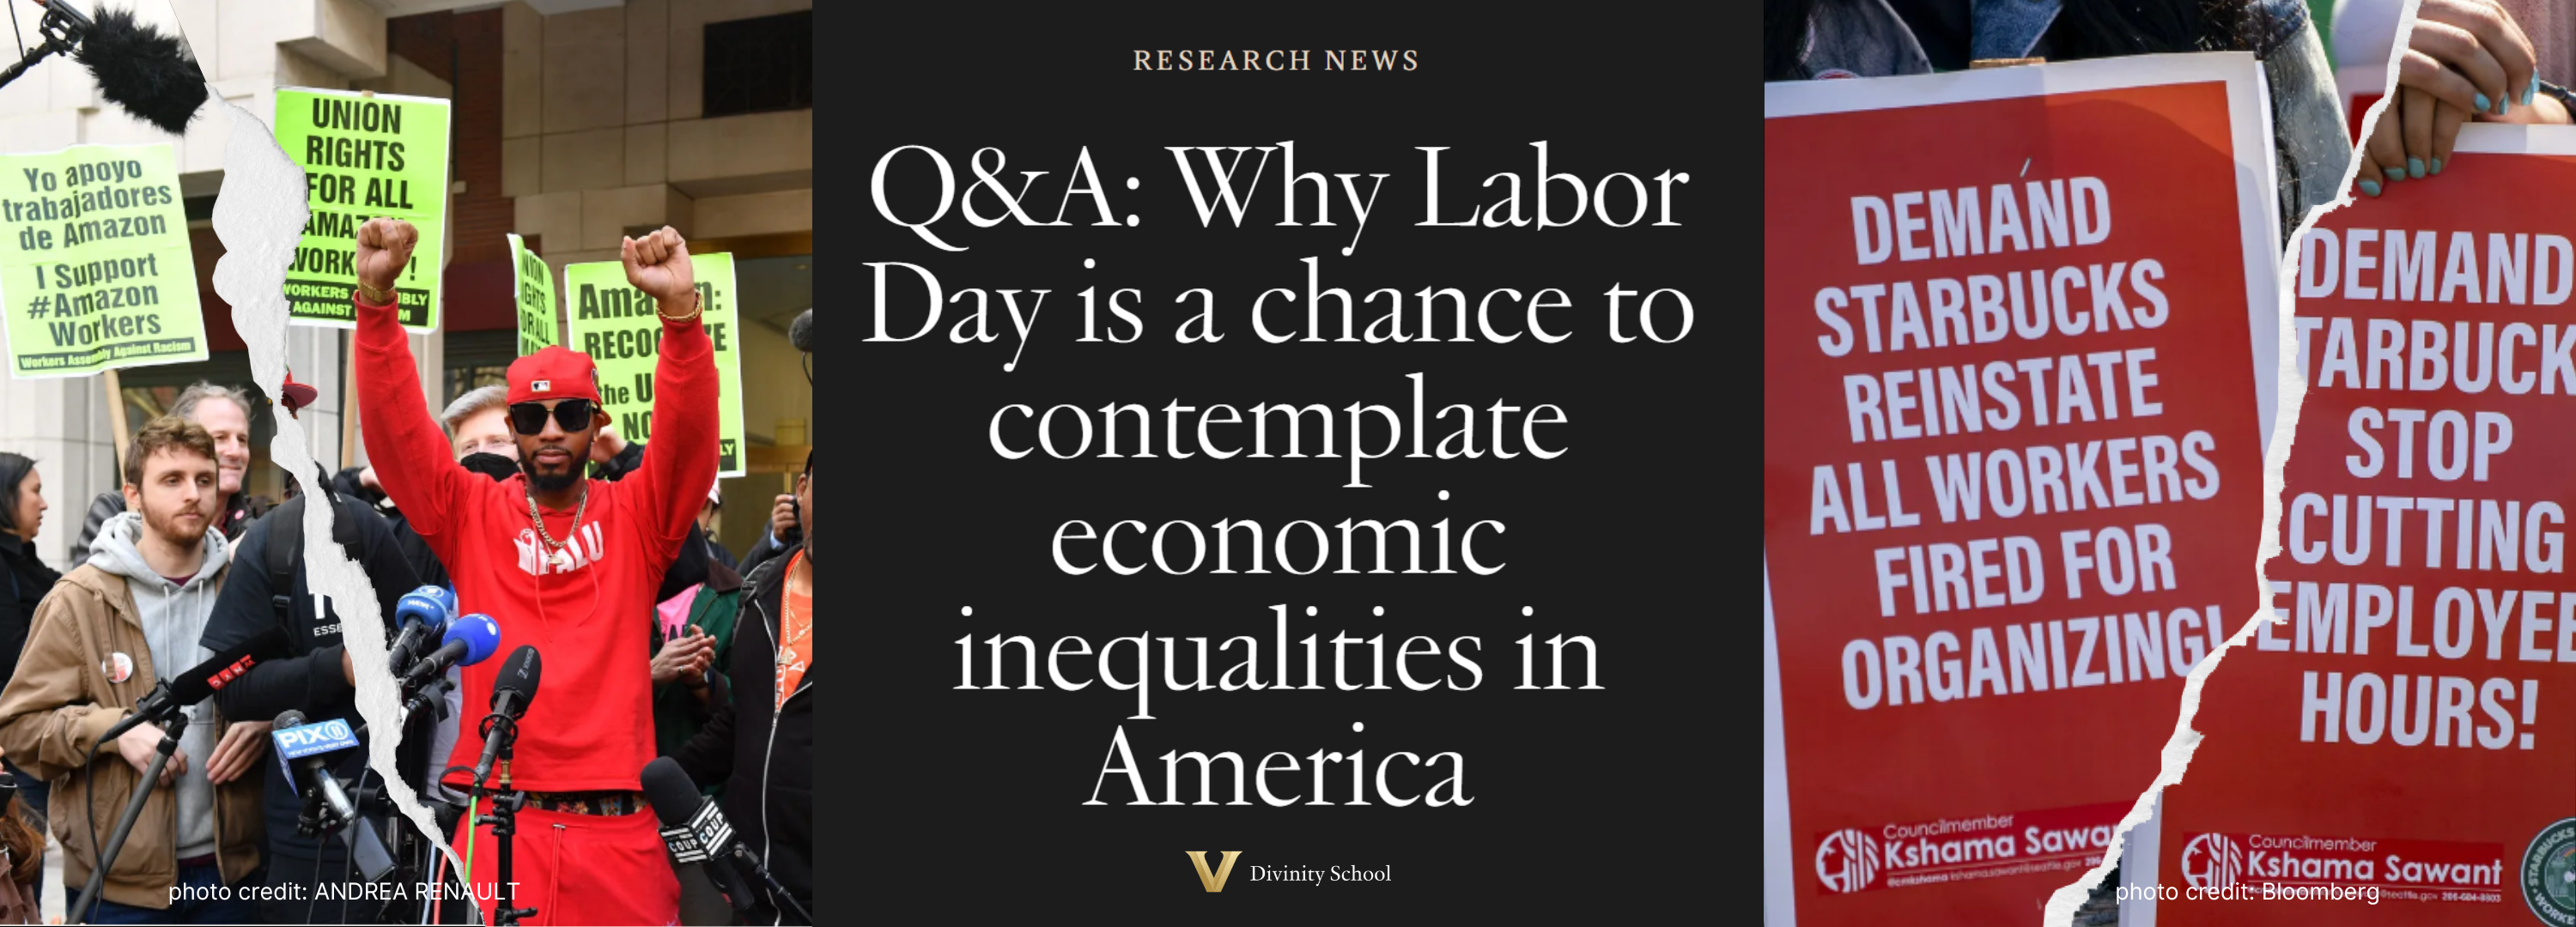 Q&A: Why Labor Day is a chance to contemplate economic inequalities in America